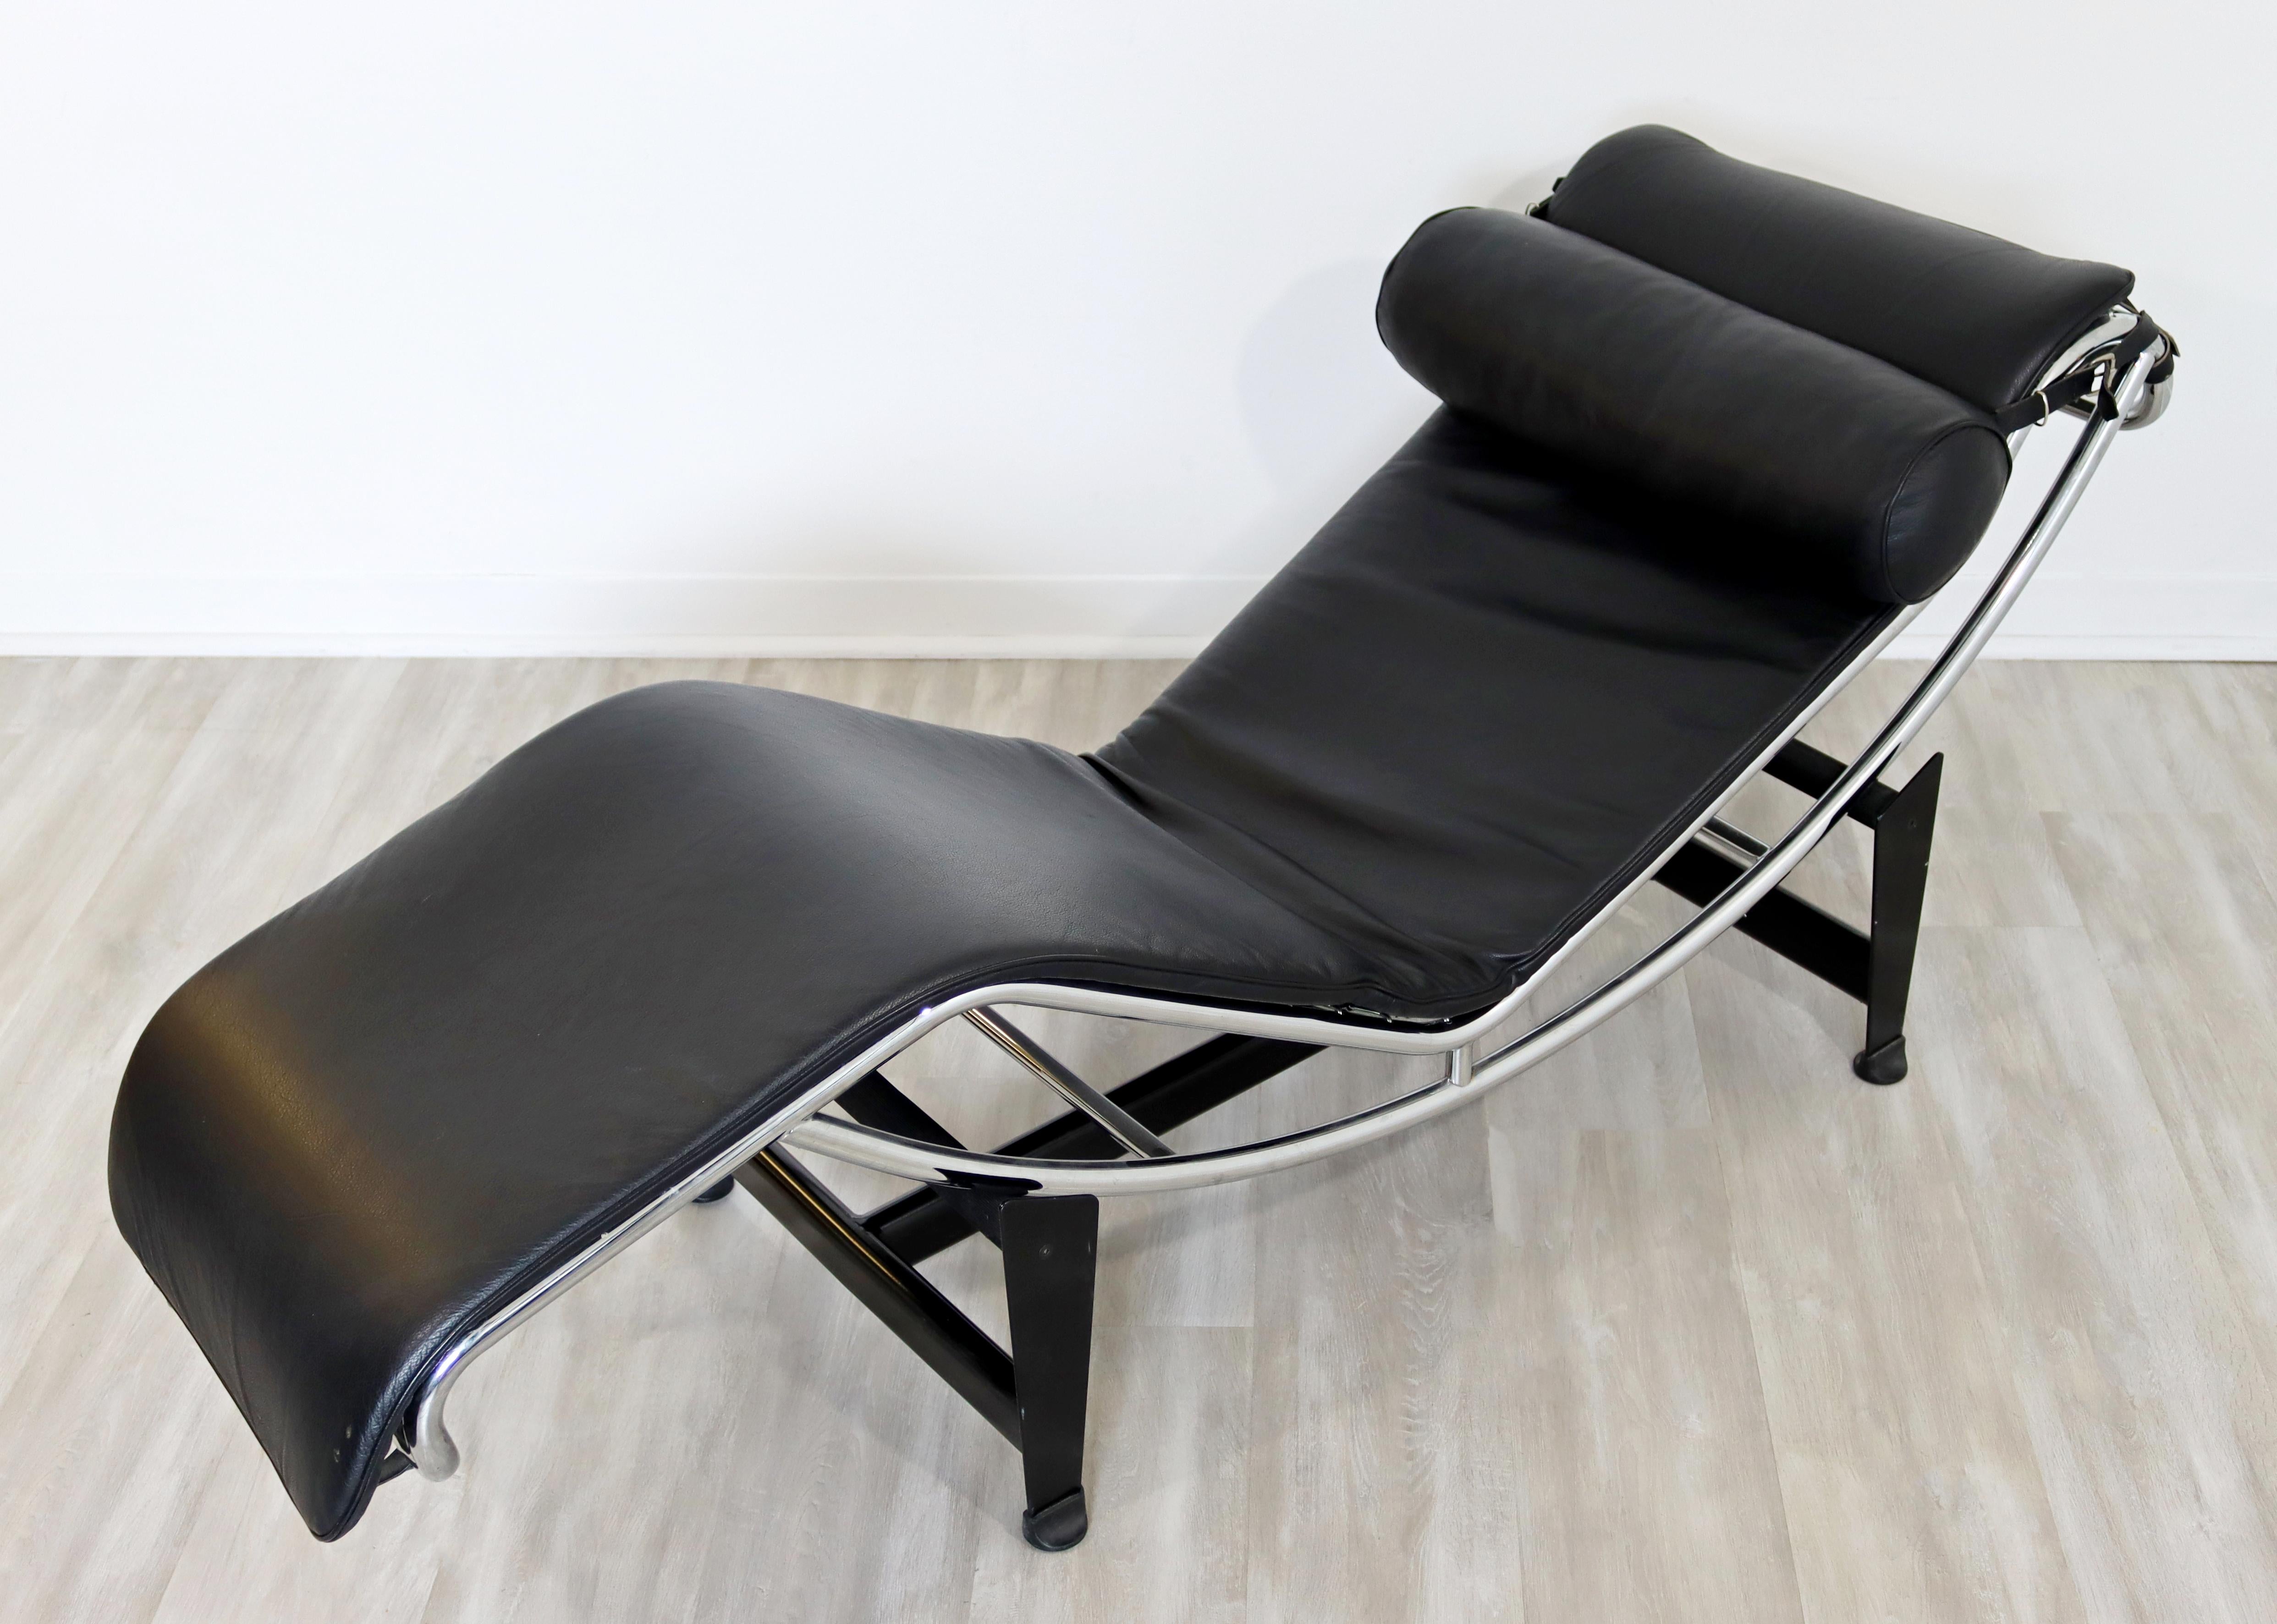 For your consideration is a classic LC4 chaise, made of chrome and with black leather upholstery, by Le Corbusier Italy, circa the 1970s. In very good vintage condition. The dimensions are 64